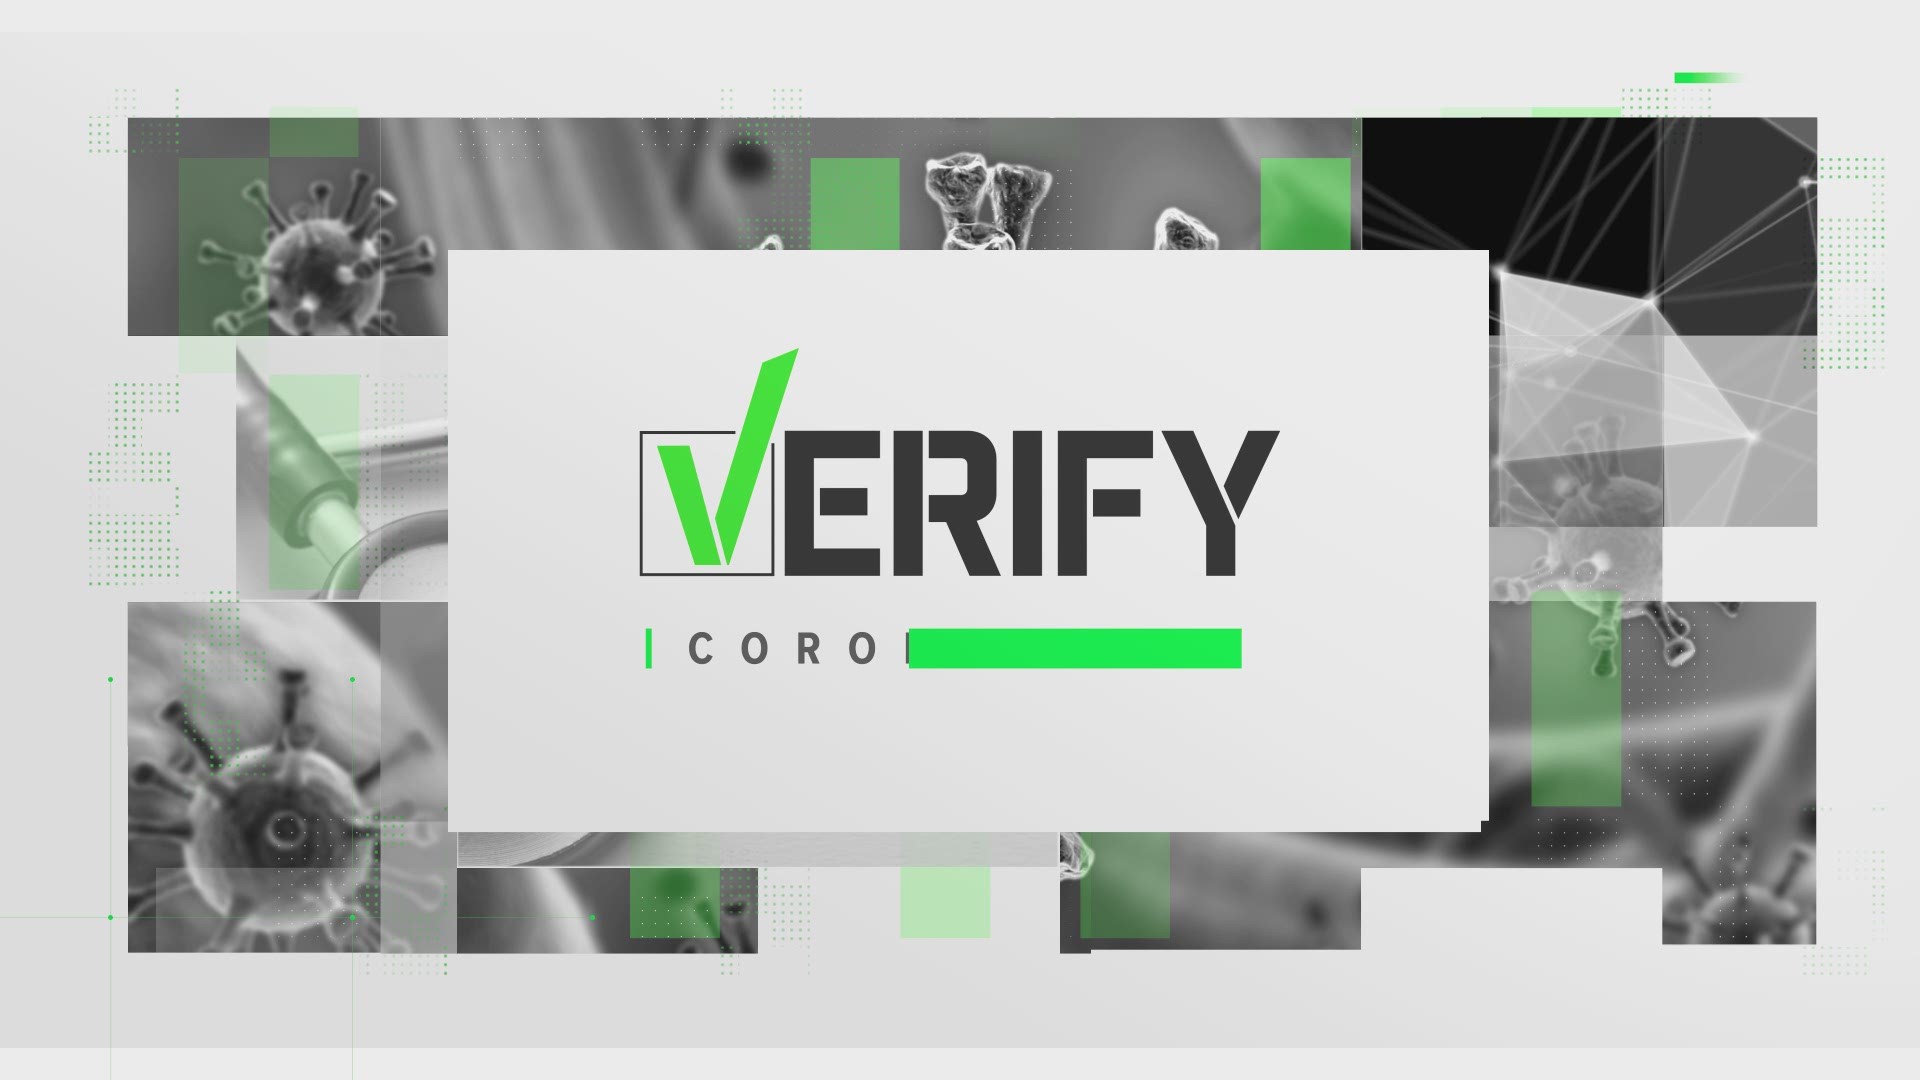 The VERIFY Team looked into how someone could become infected with COVID-19 even after being fully vaccinated.